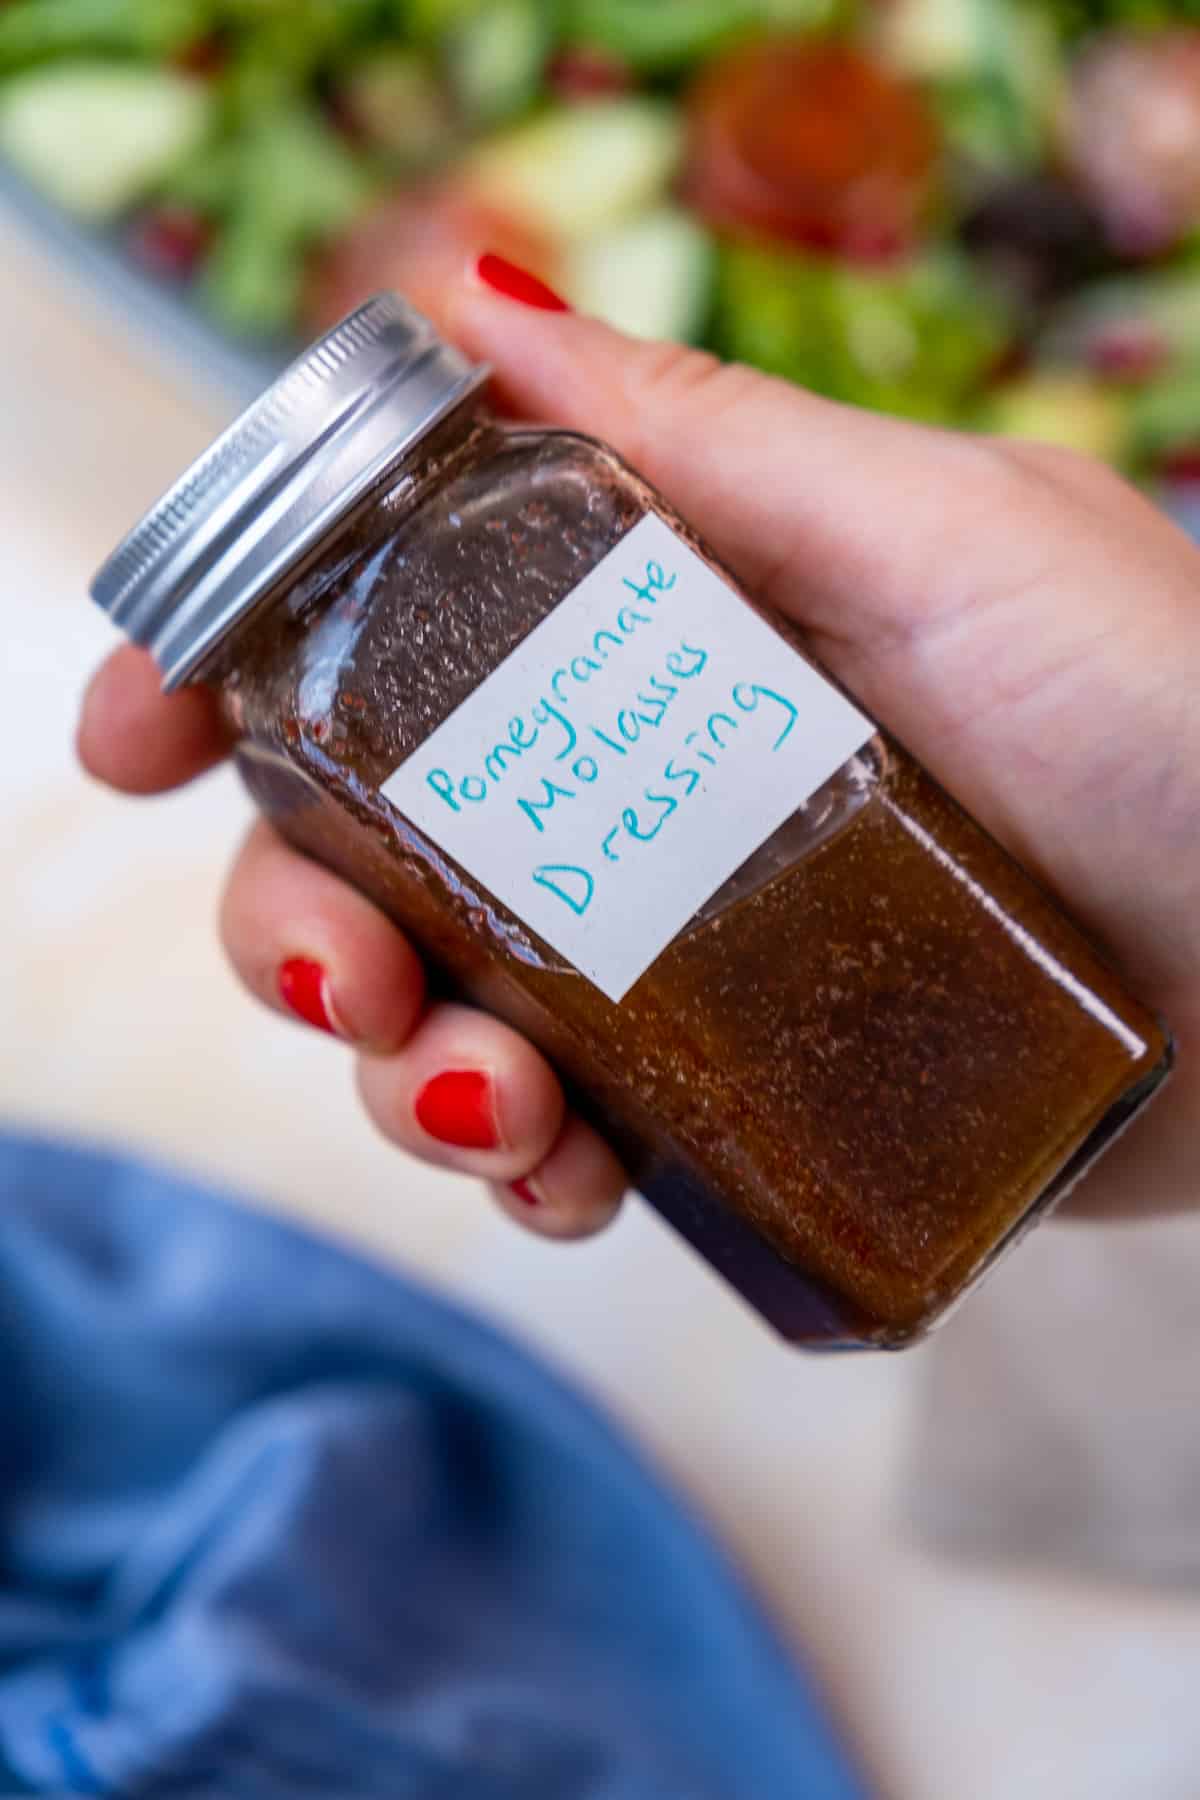 A hand holding a small jar of pomegranate molasses salad dressing.